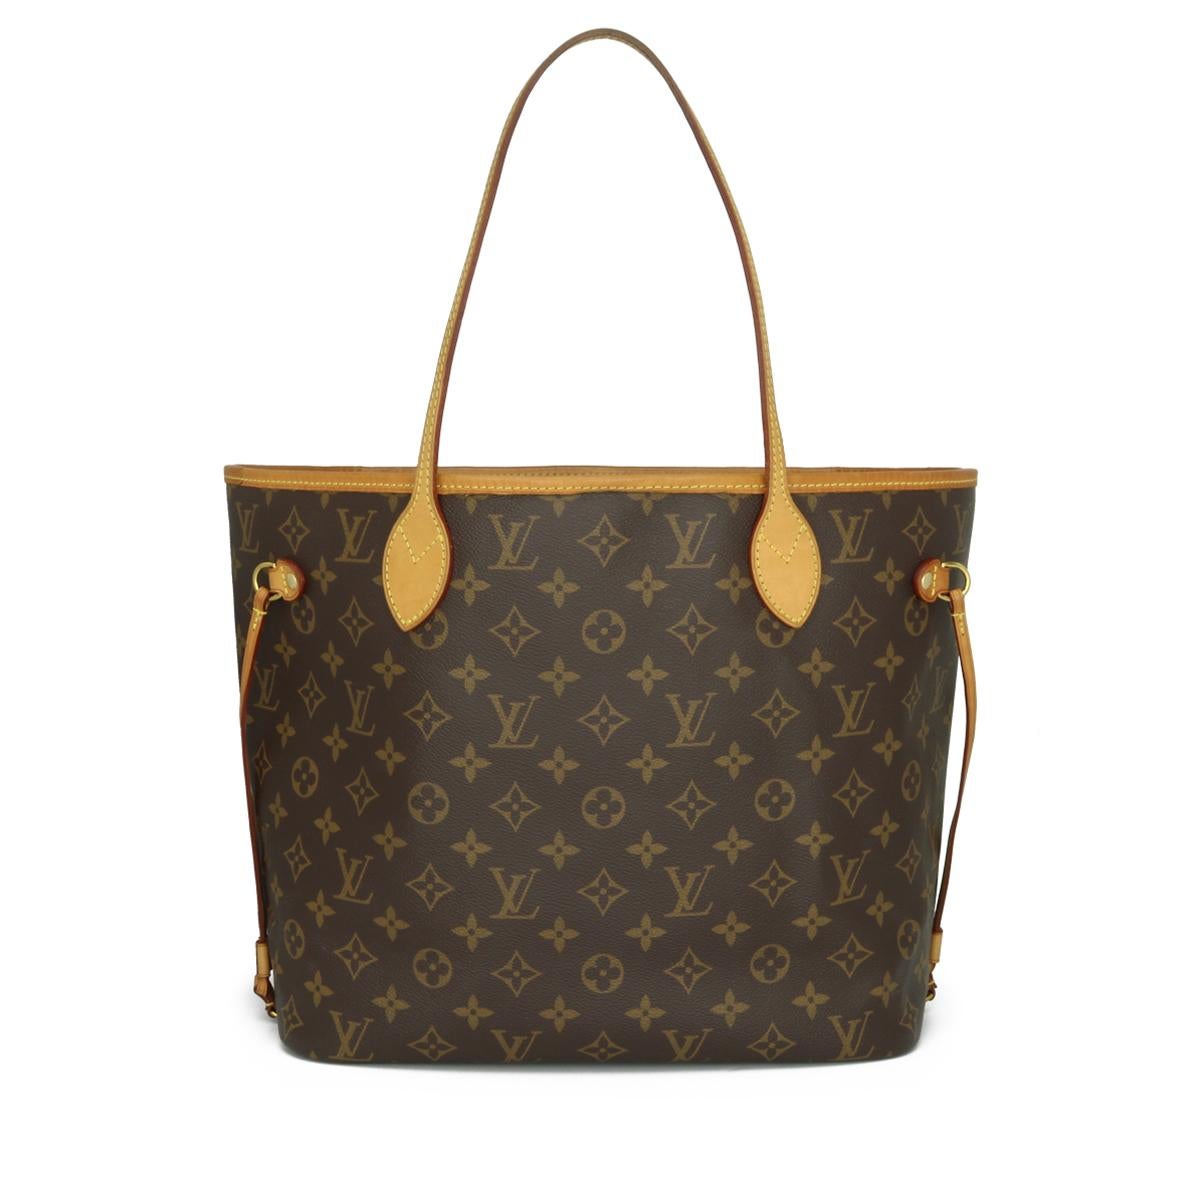 Louis Vuitton Neverfull MM in Monogram with Beige Interior 2016.

This bag is in very good condition. 

- Exterior Condition: Good condition. Light surface rubbing to four base corners. General marking and leather wear around the vachetta cowhide